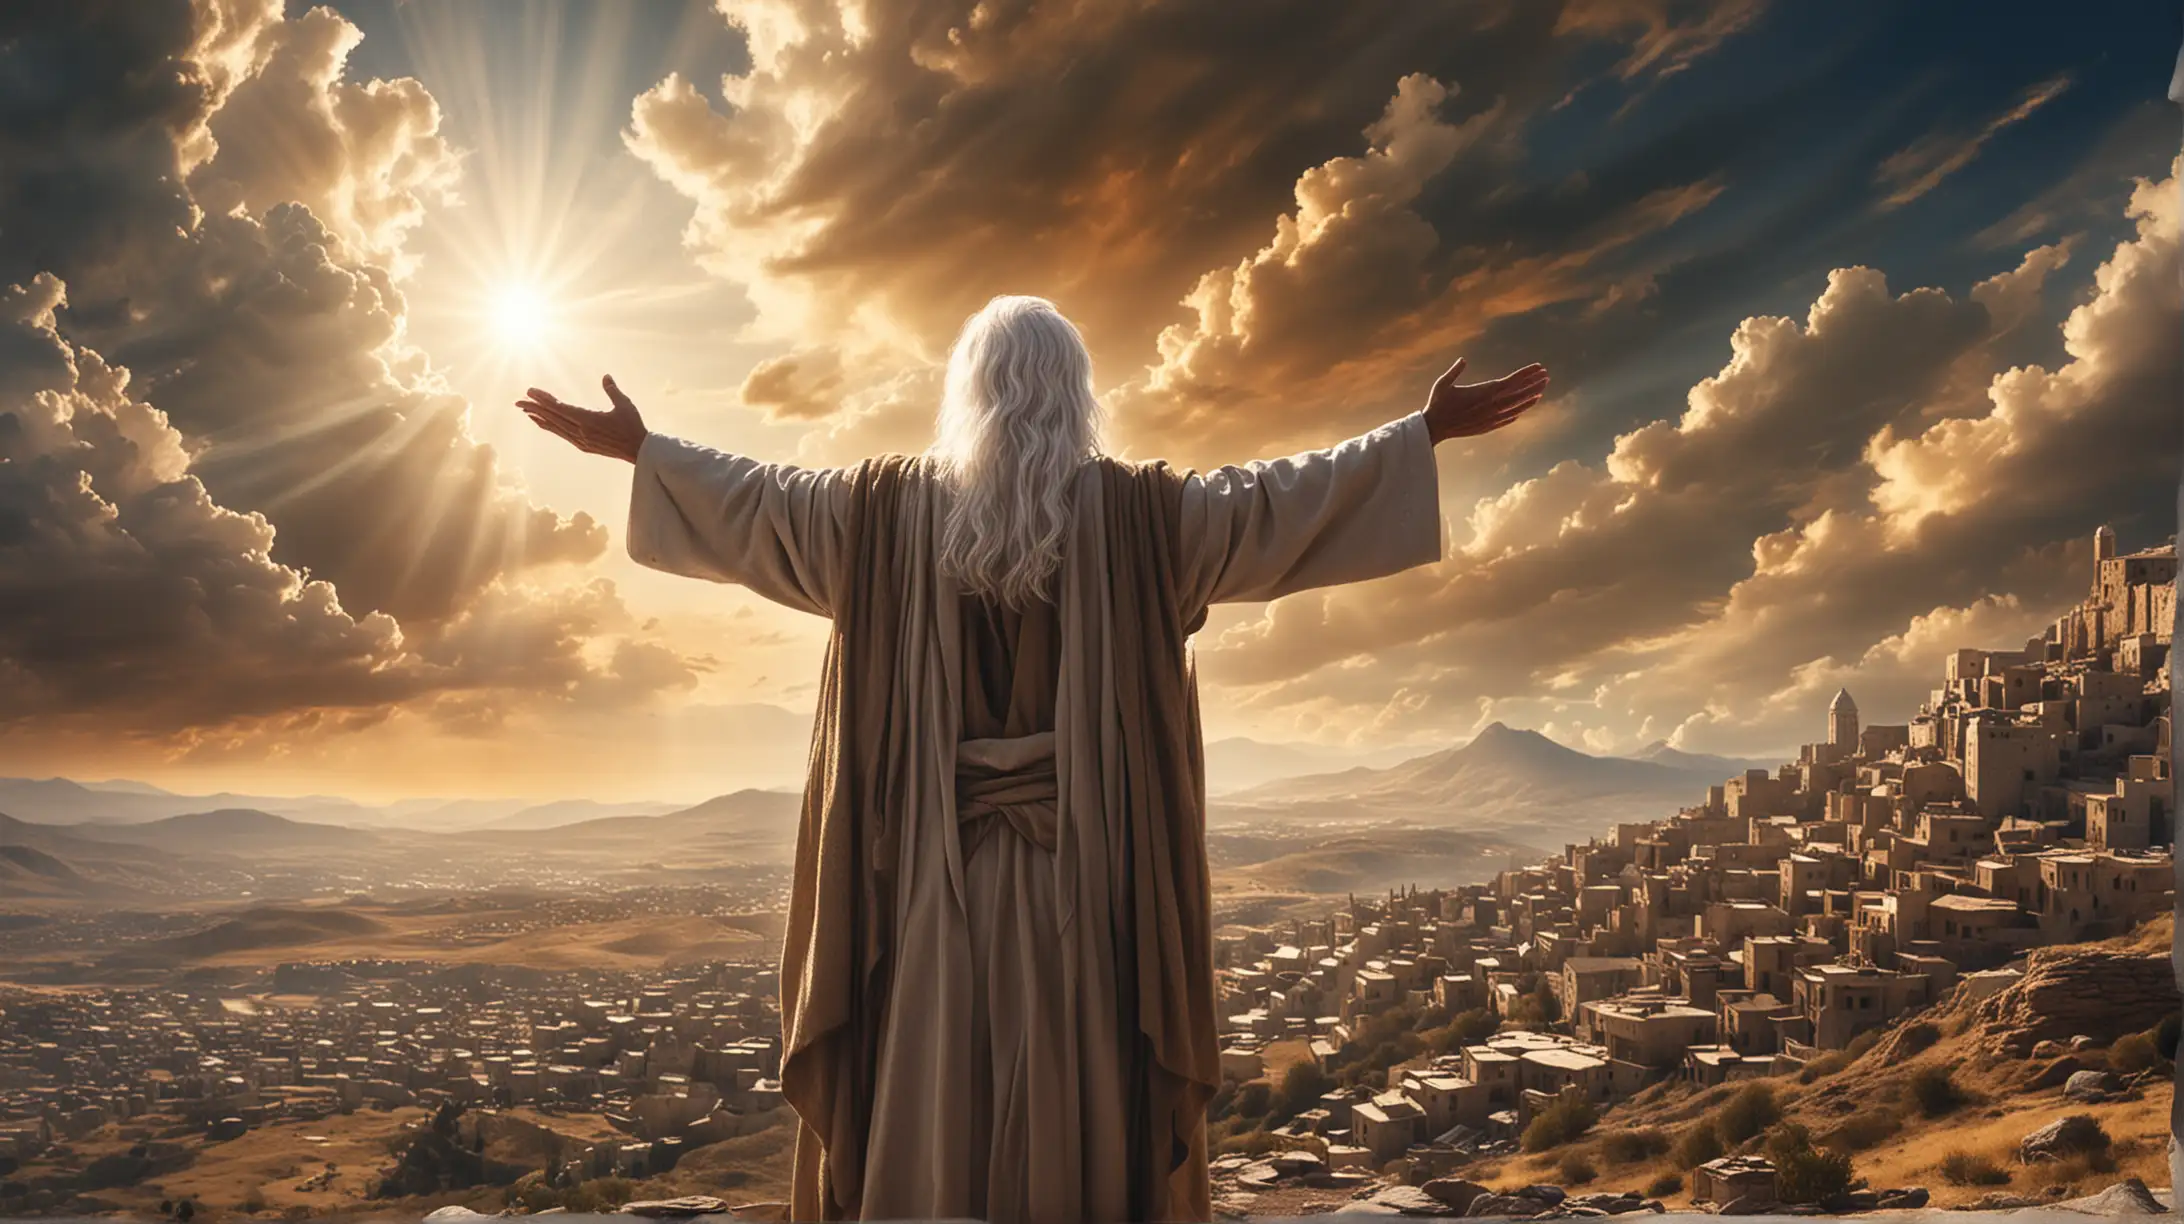 A Godly looking man with white hair, his hand outstretched standing on a mountain. A magnificent sky, and below you can see a small town, and a gathering of some people below listening to him. Set during the Era of the Biblical Moses.